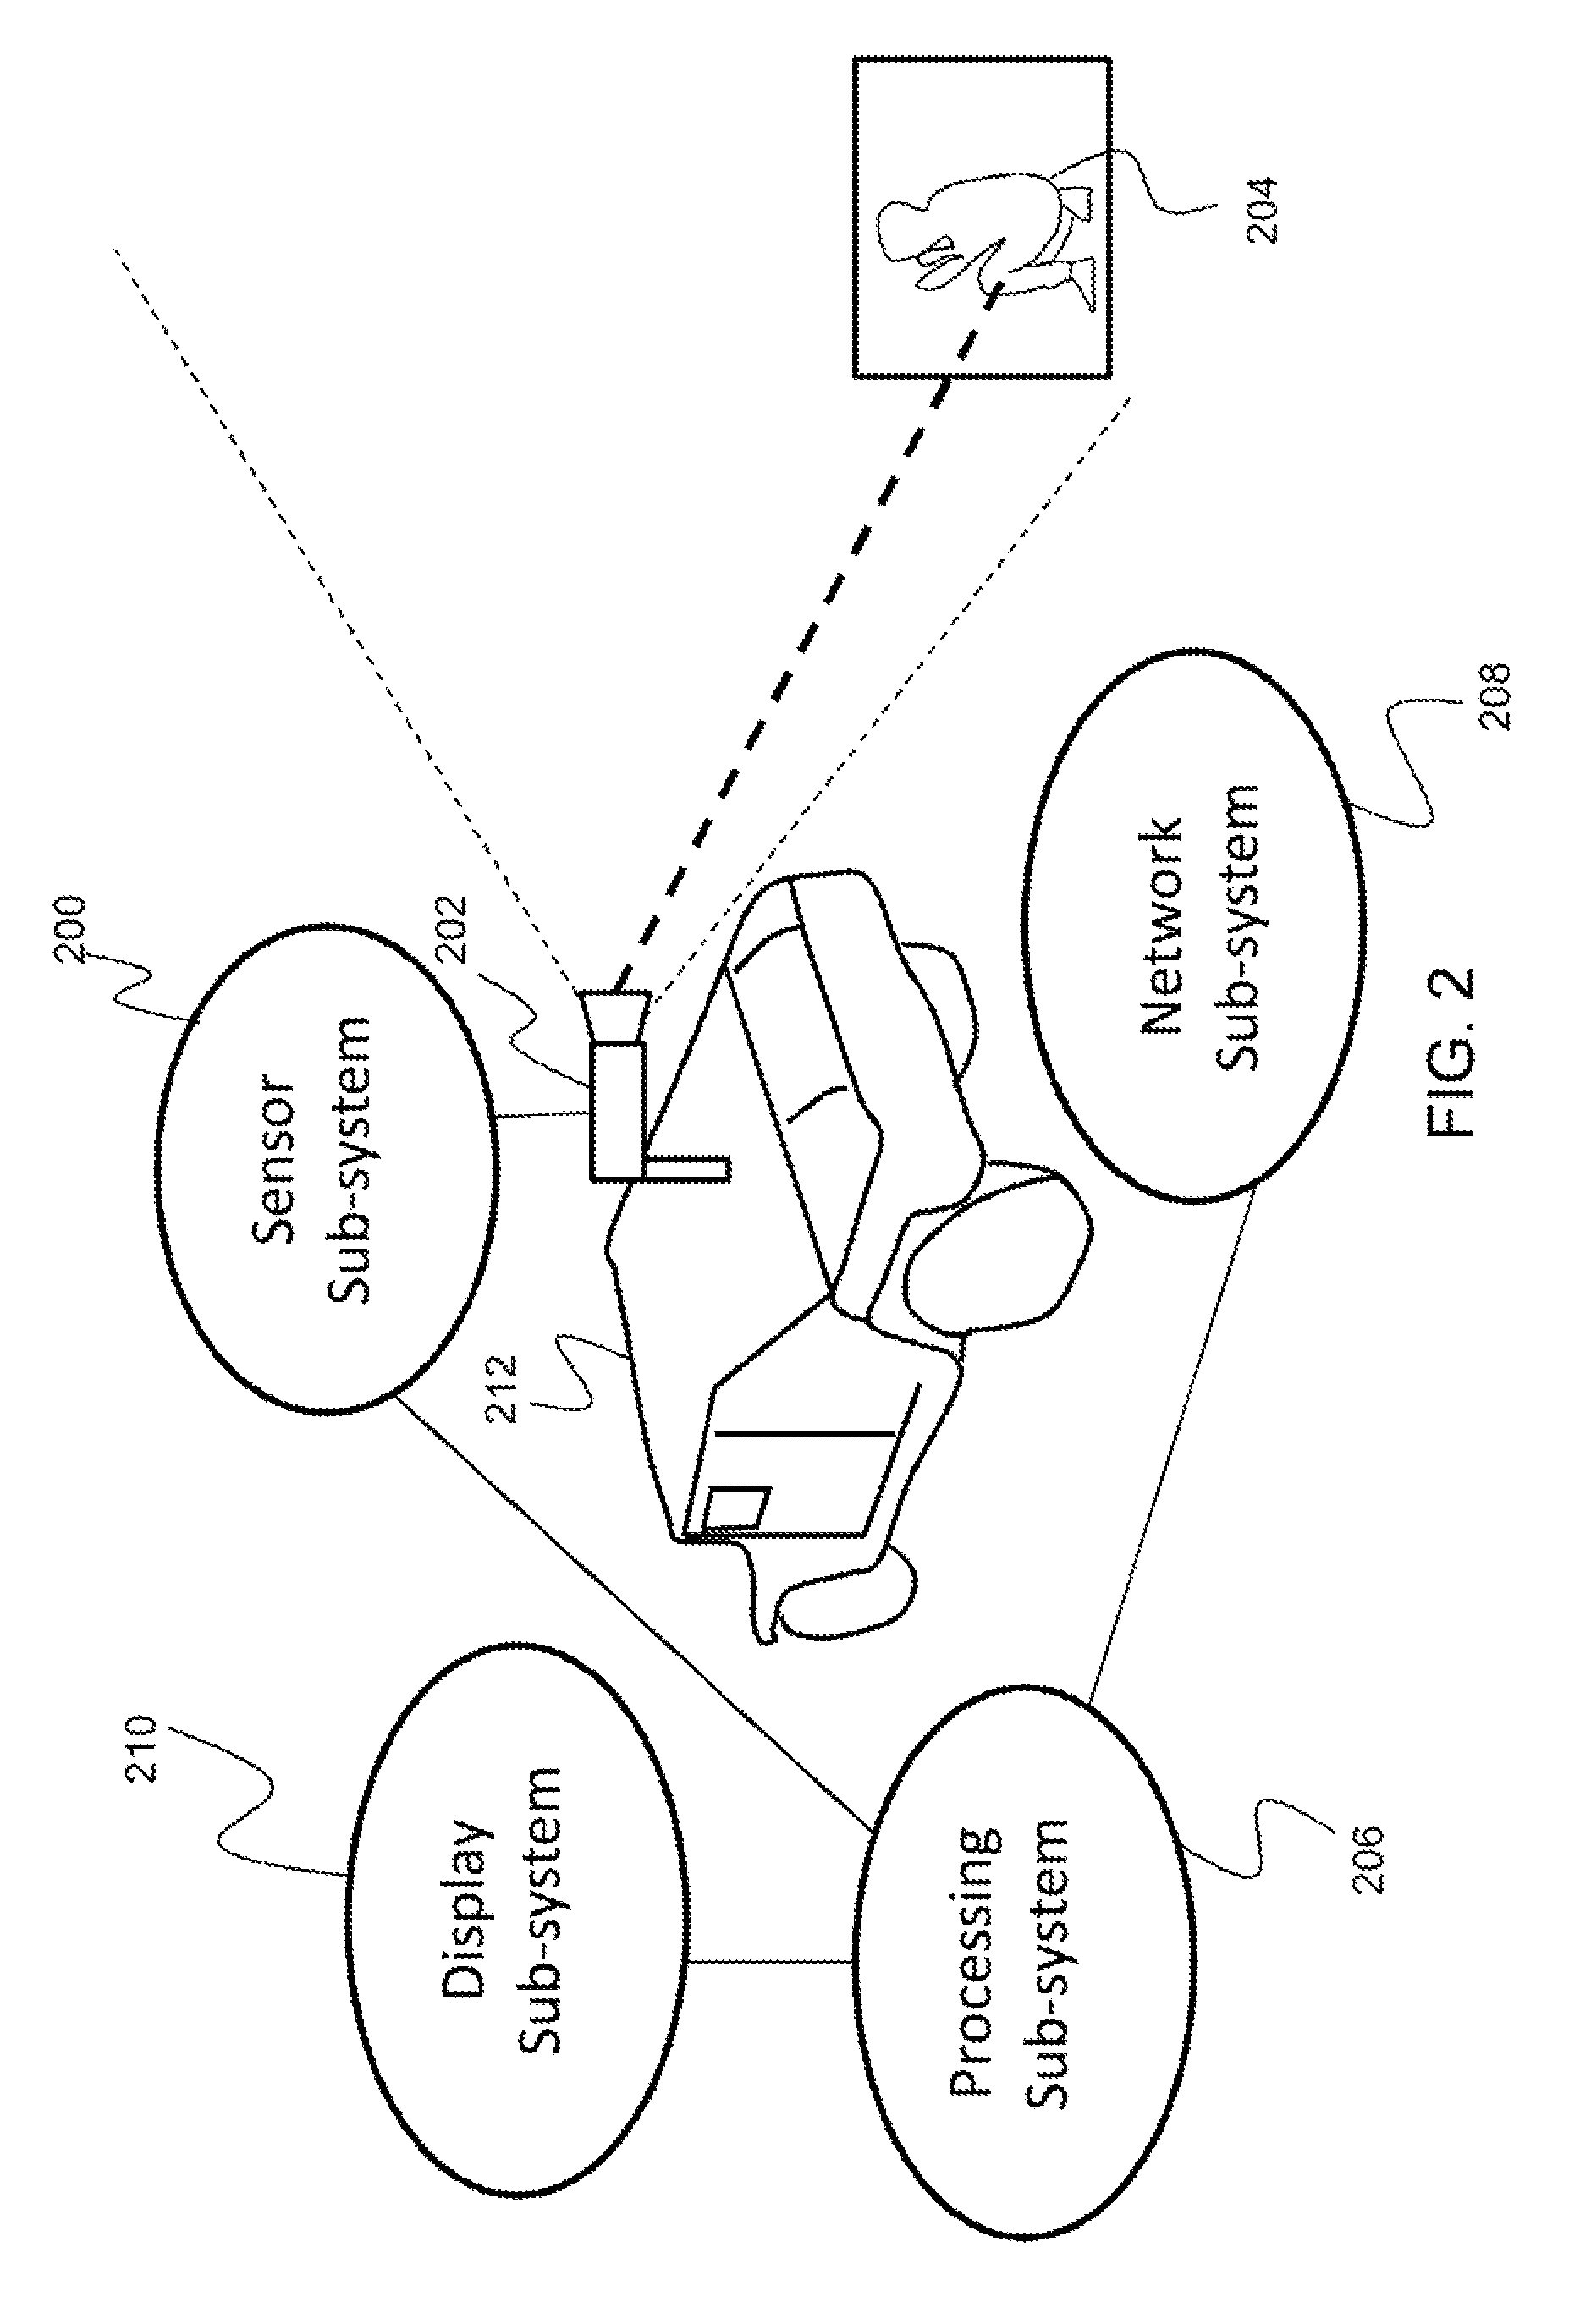 System for automatic object localization based on visual simultaneous localization and mapping (SLAM) and cognitive swarm recognition